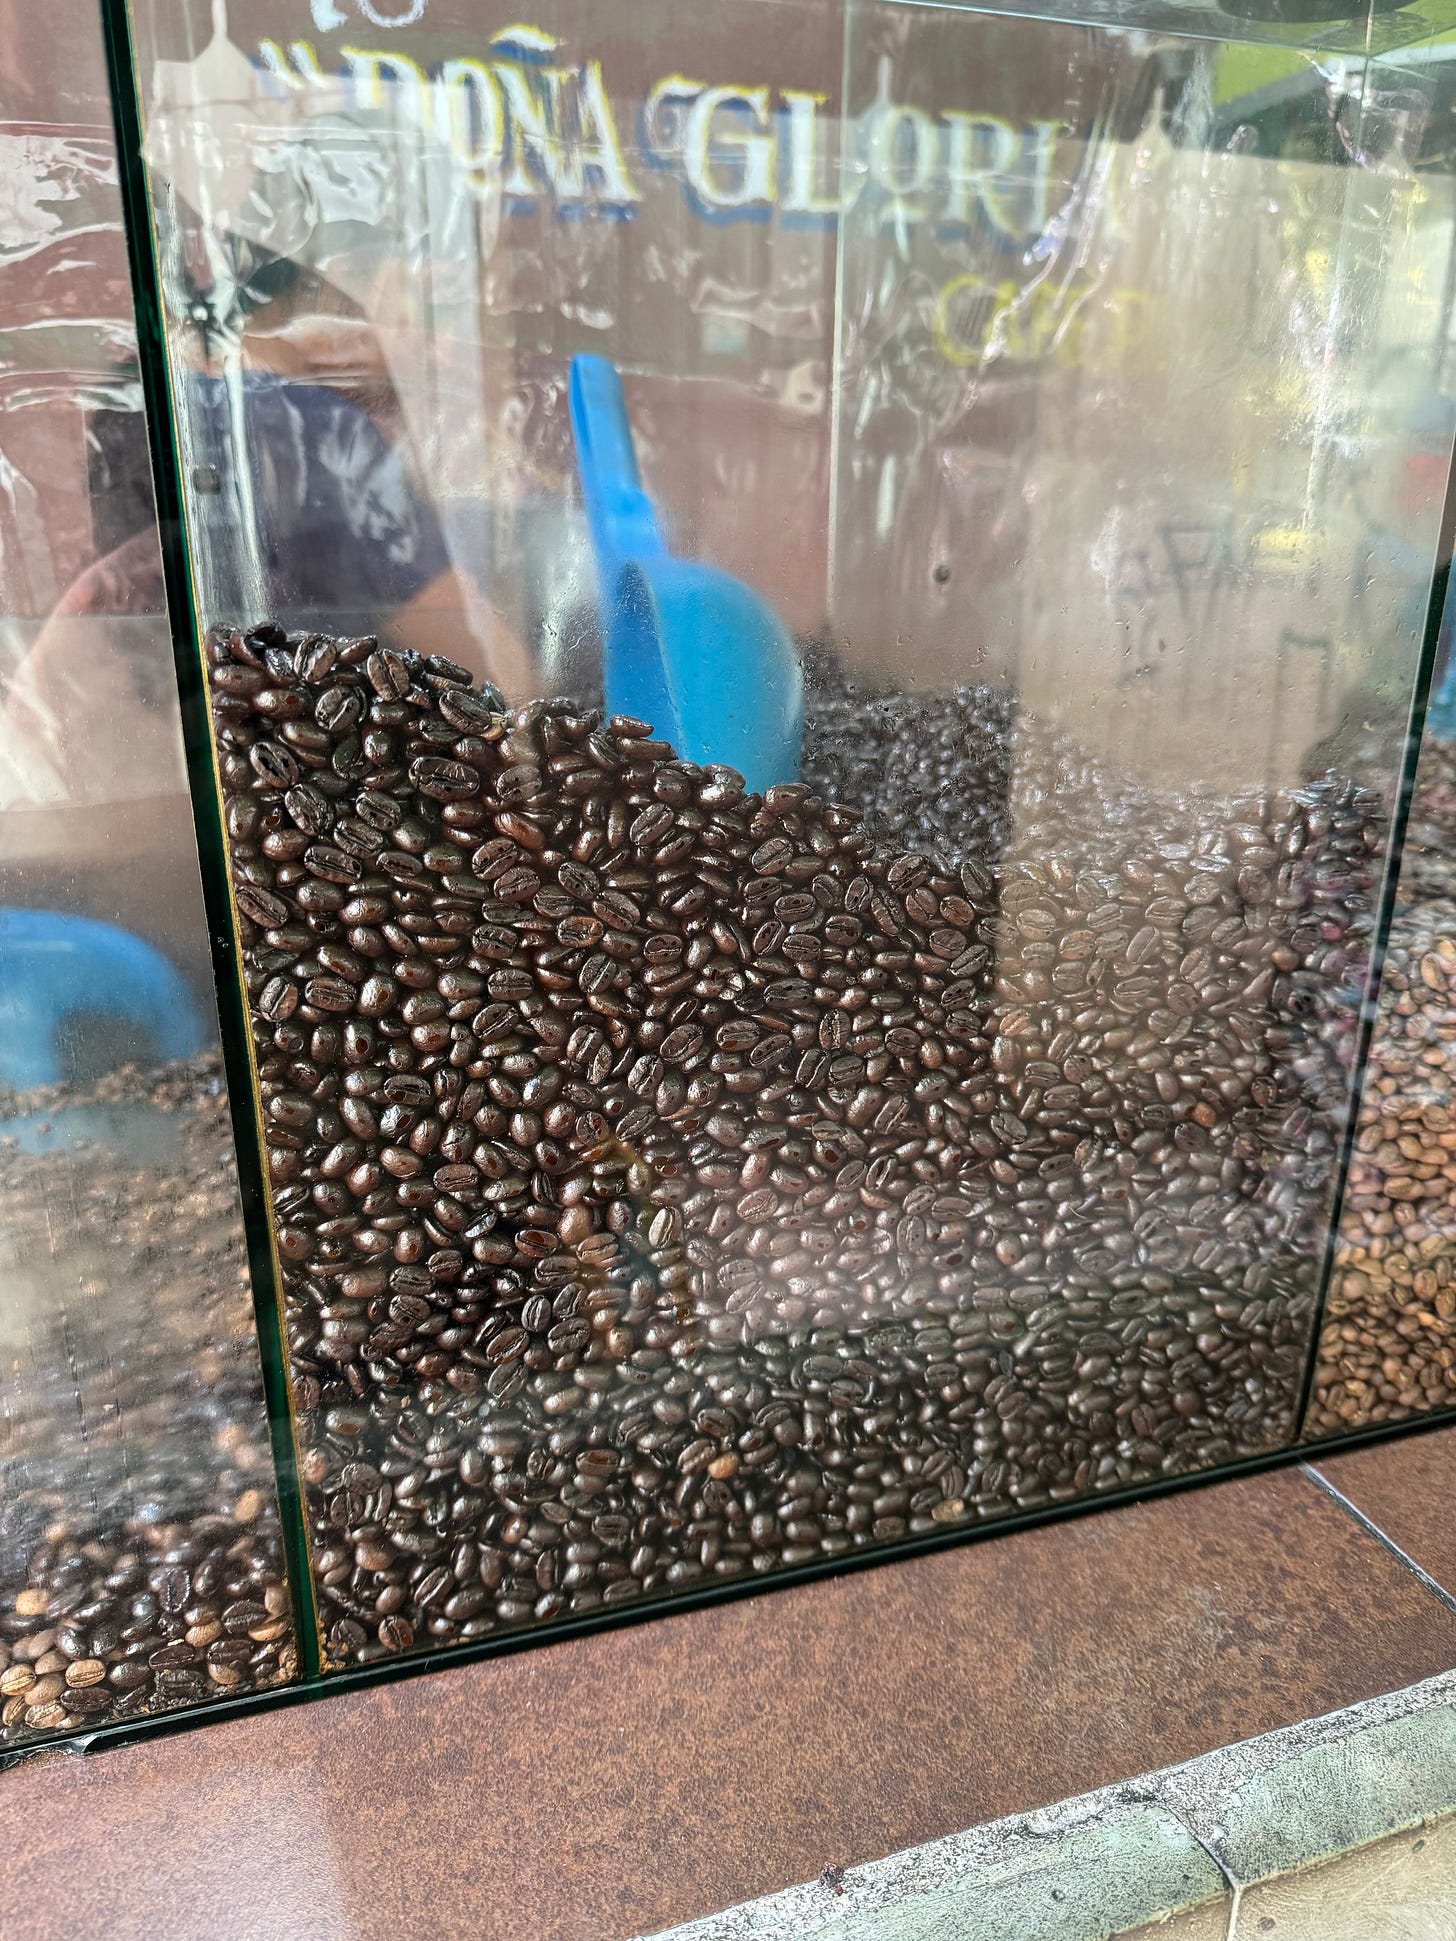 A class case holding coffee beans at a local market.